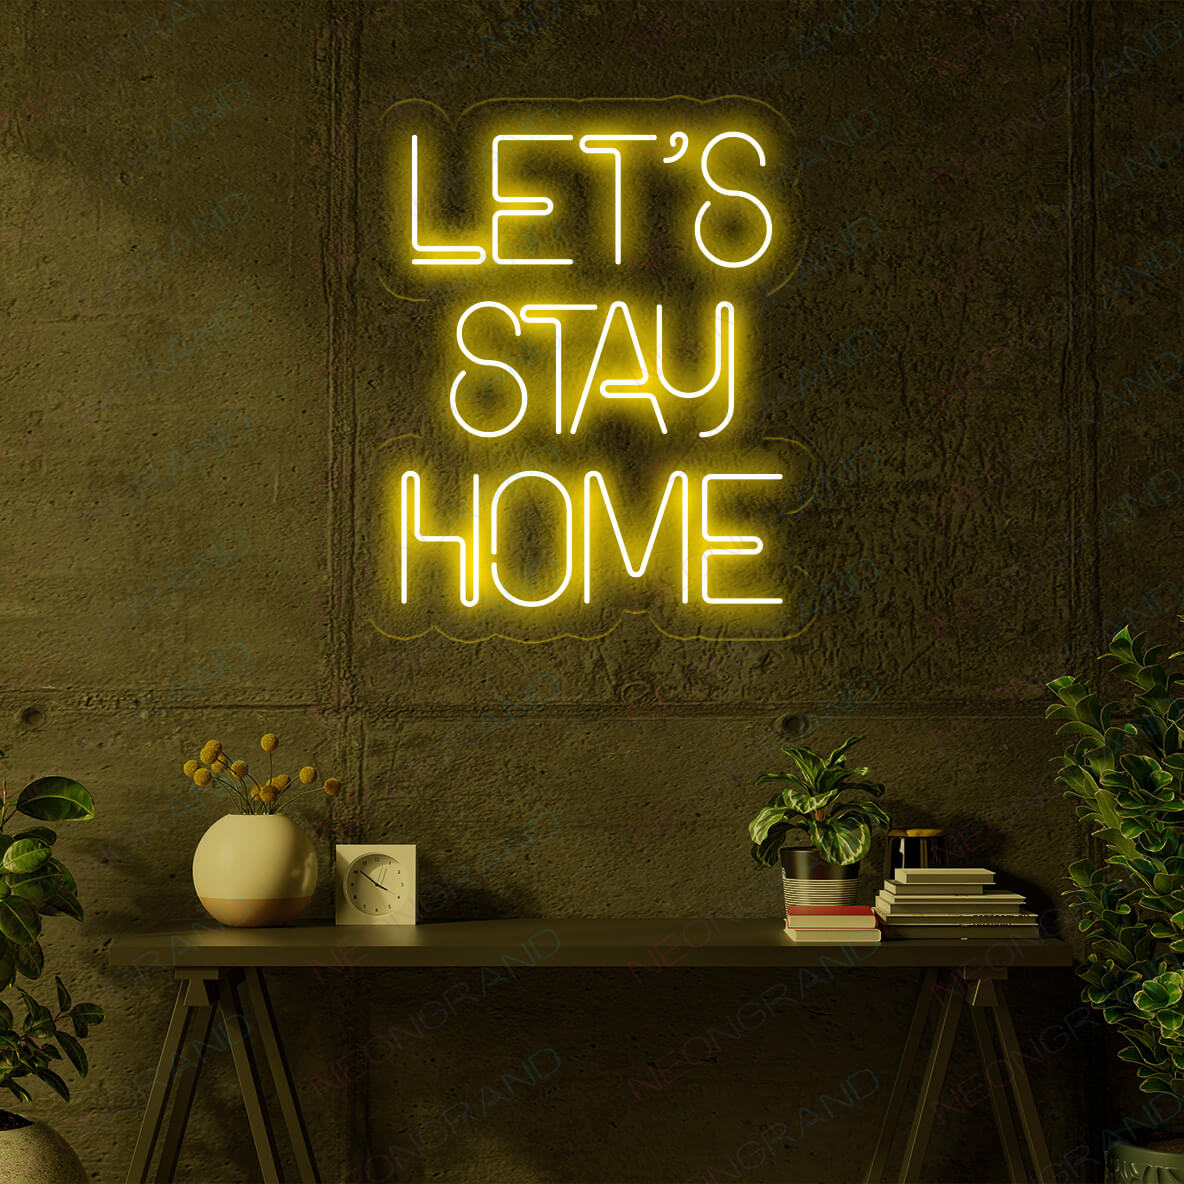 Let's Stay Home Neon Sign Led Light yellow